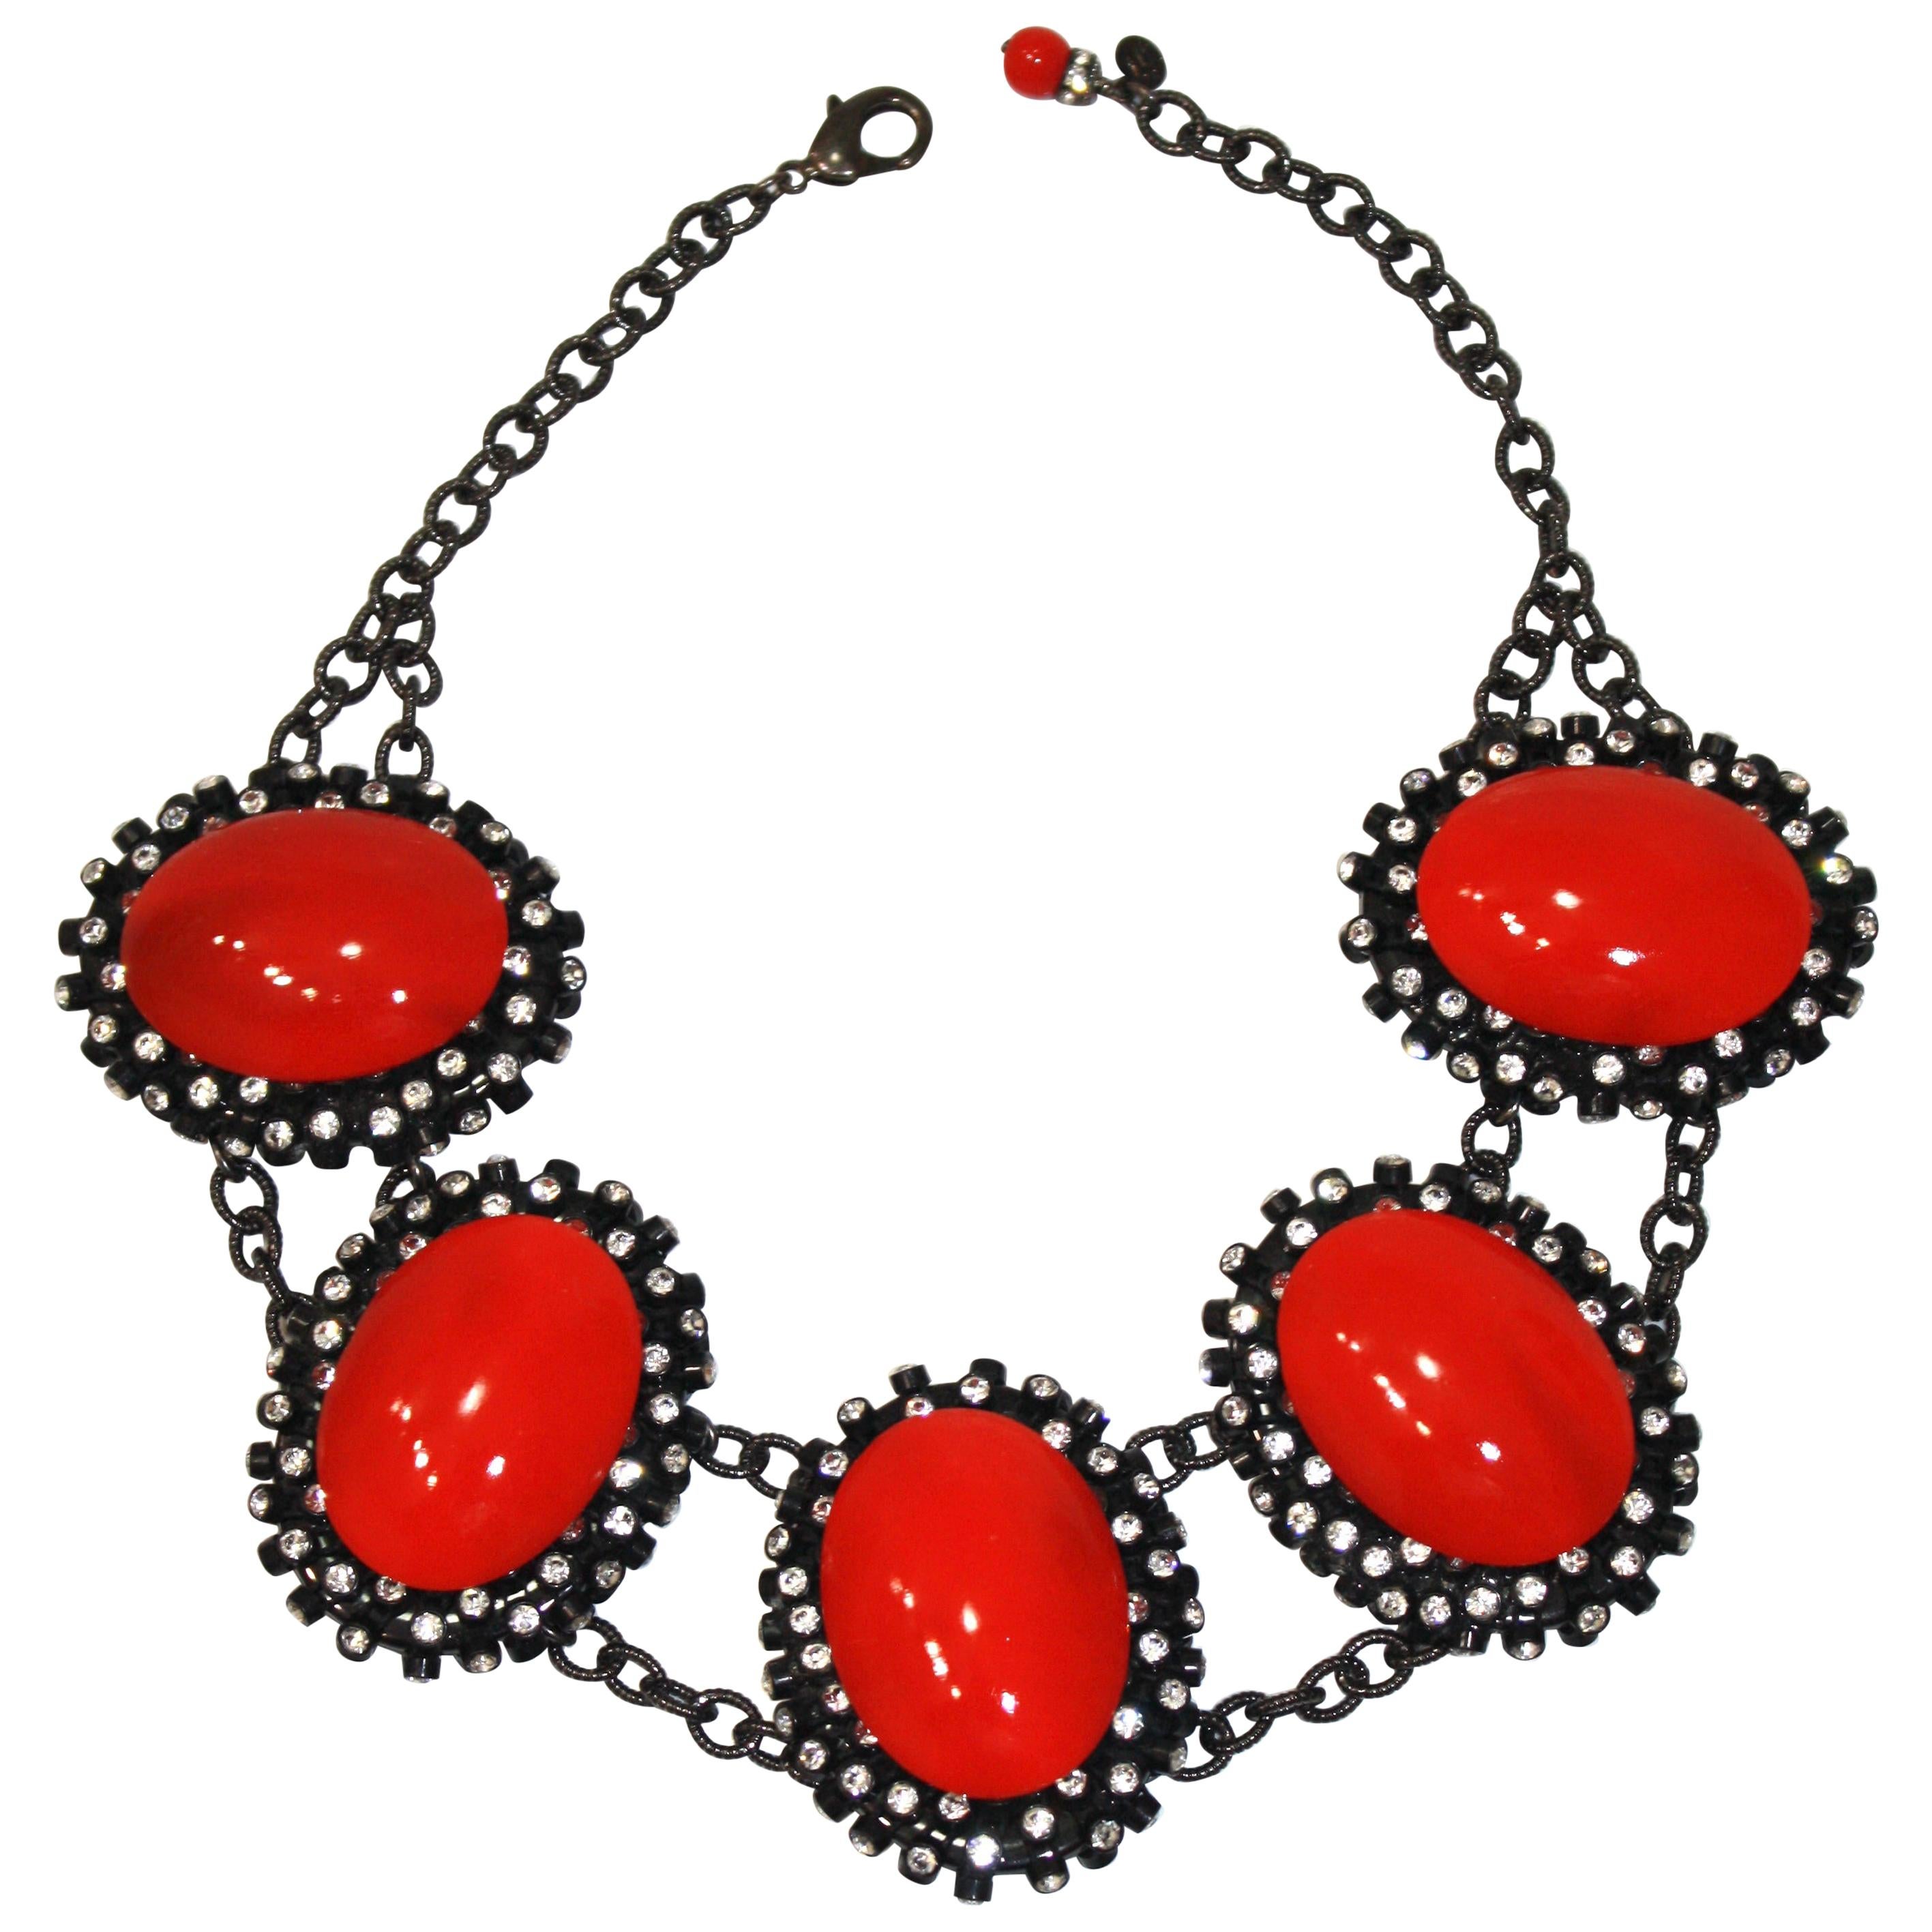 Francoise Montague Red Agate, Swarovski Crystal, and Black Rhodium Necklace